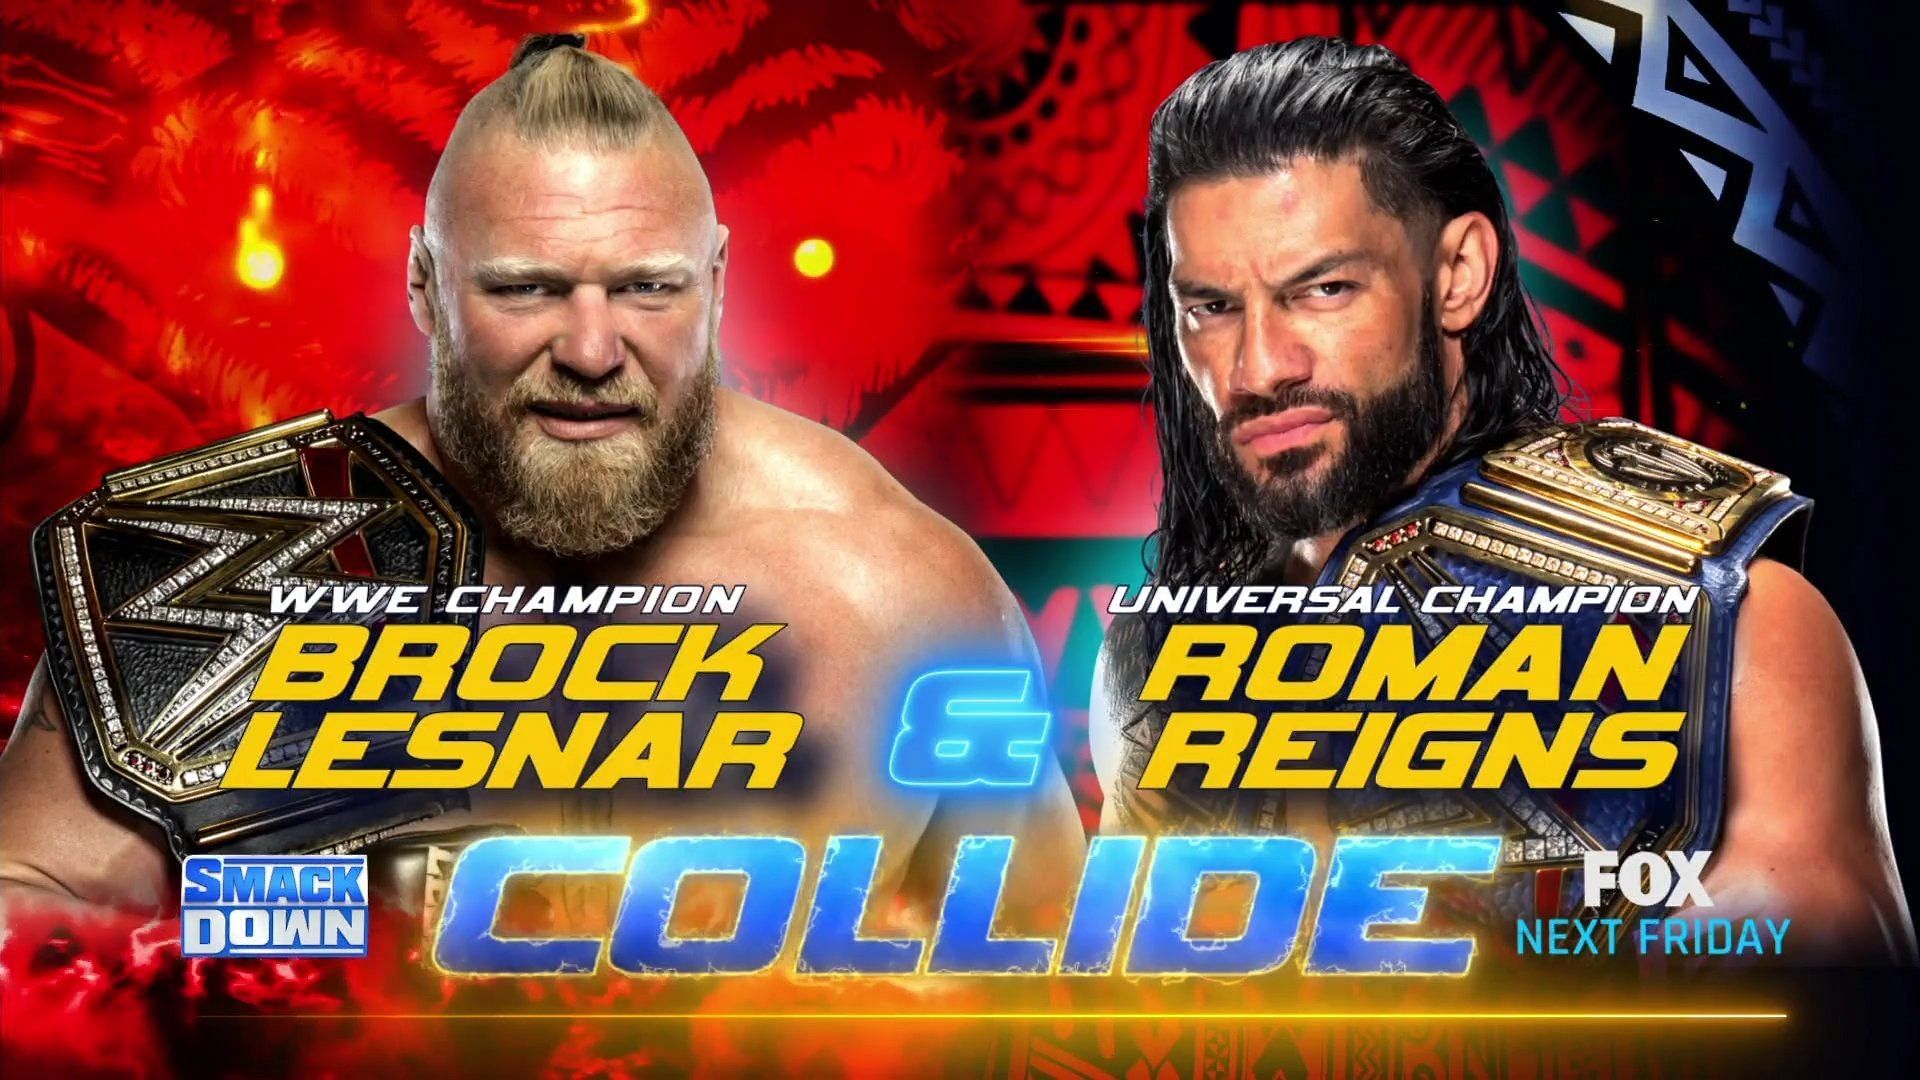 WWE Champion Brock Lesnar and Universal Champion Roman Reigns will collide this week